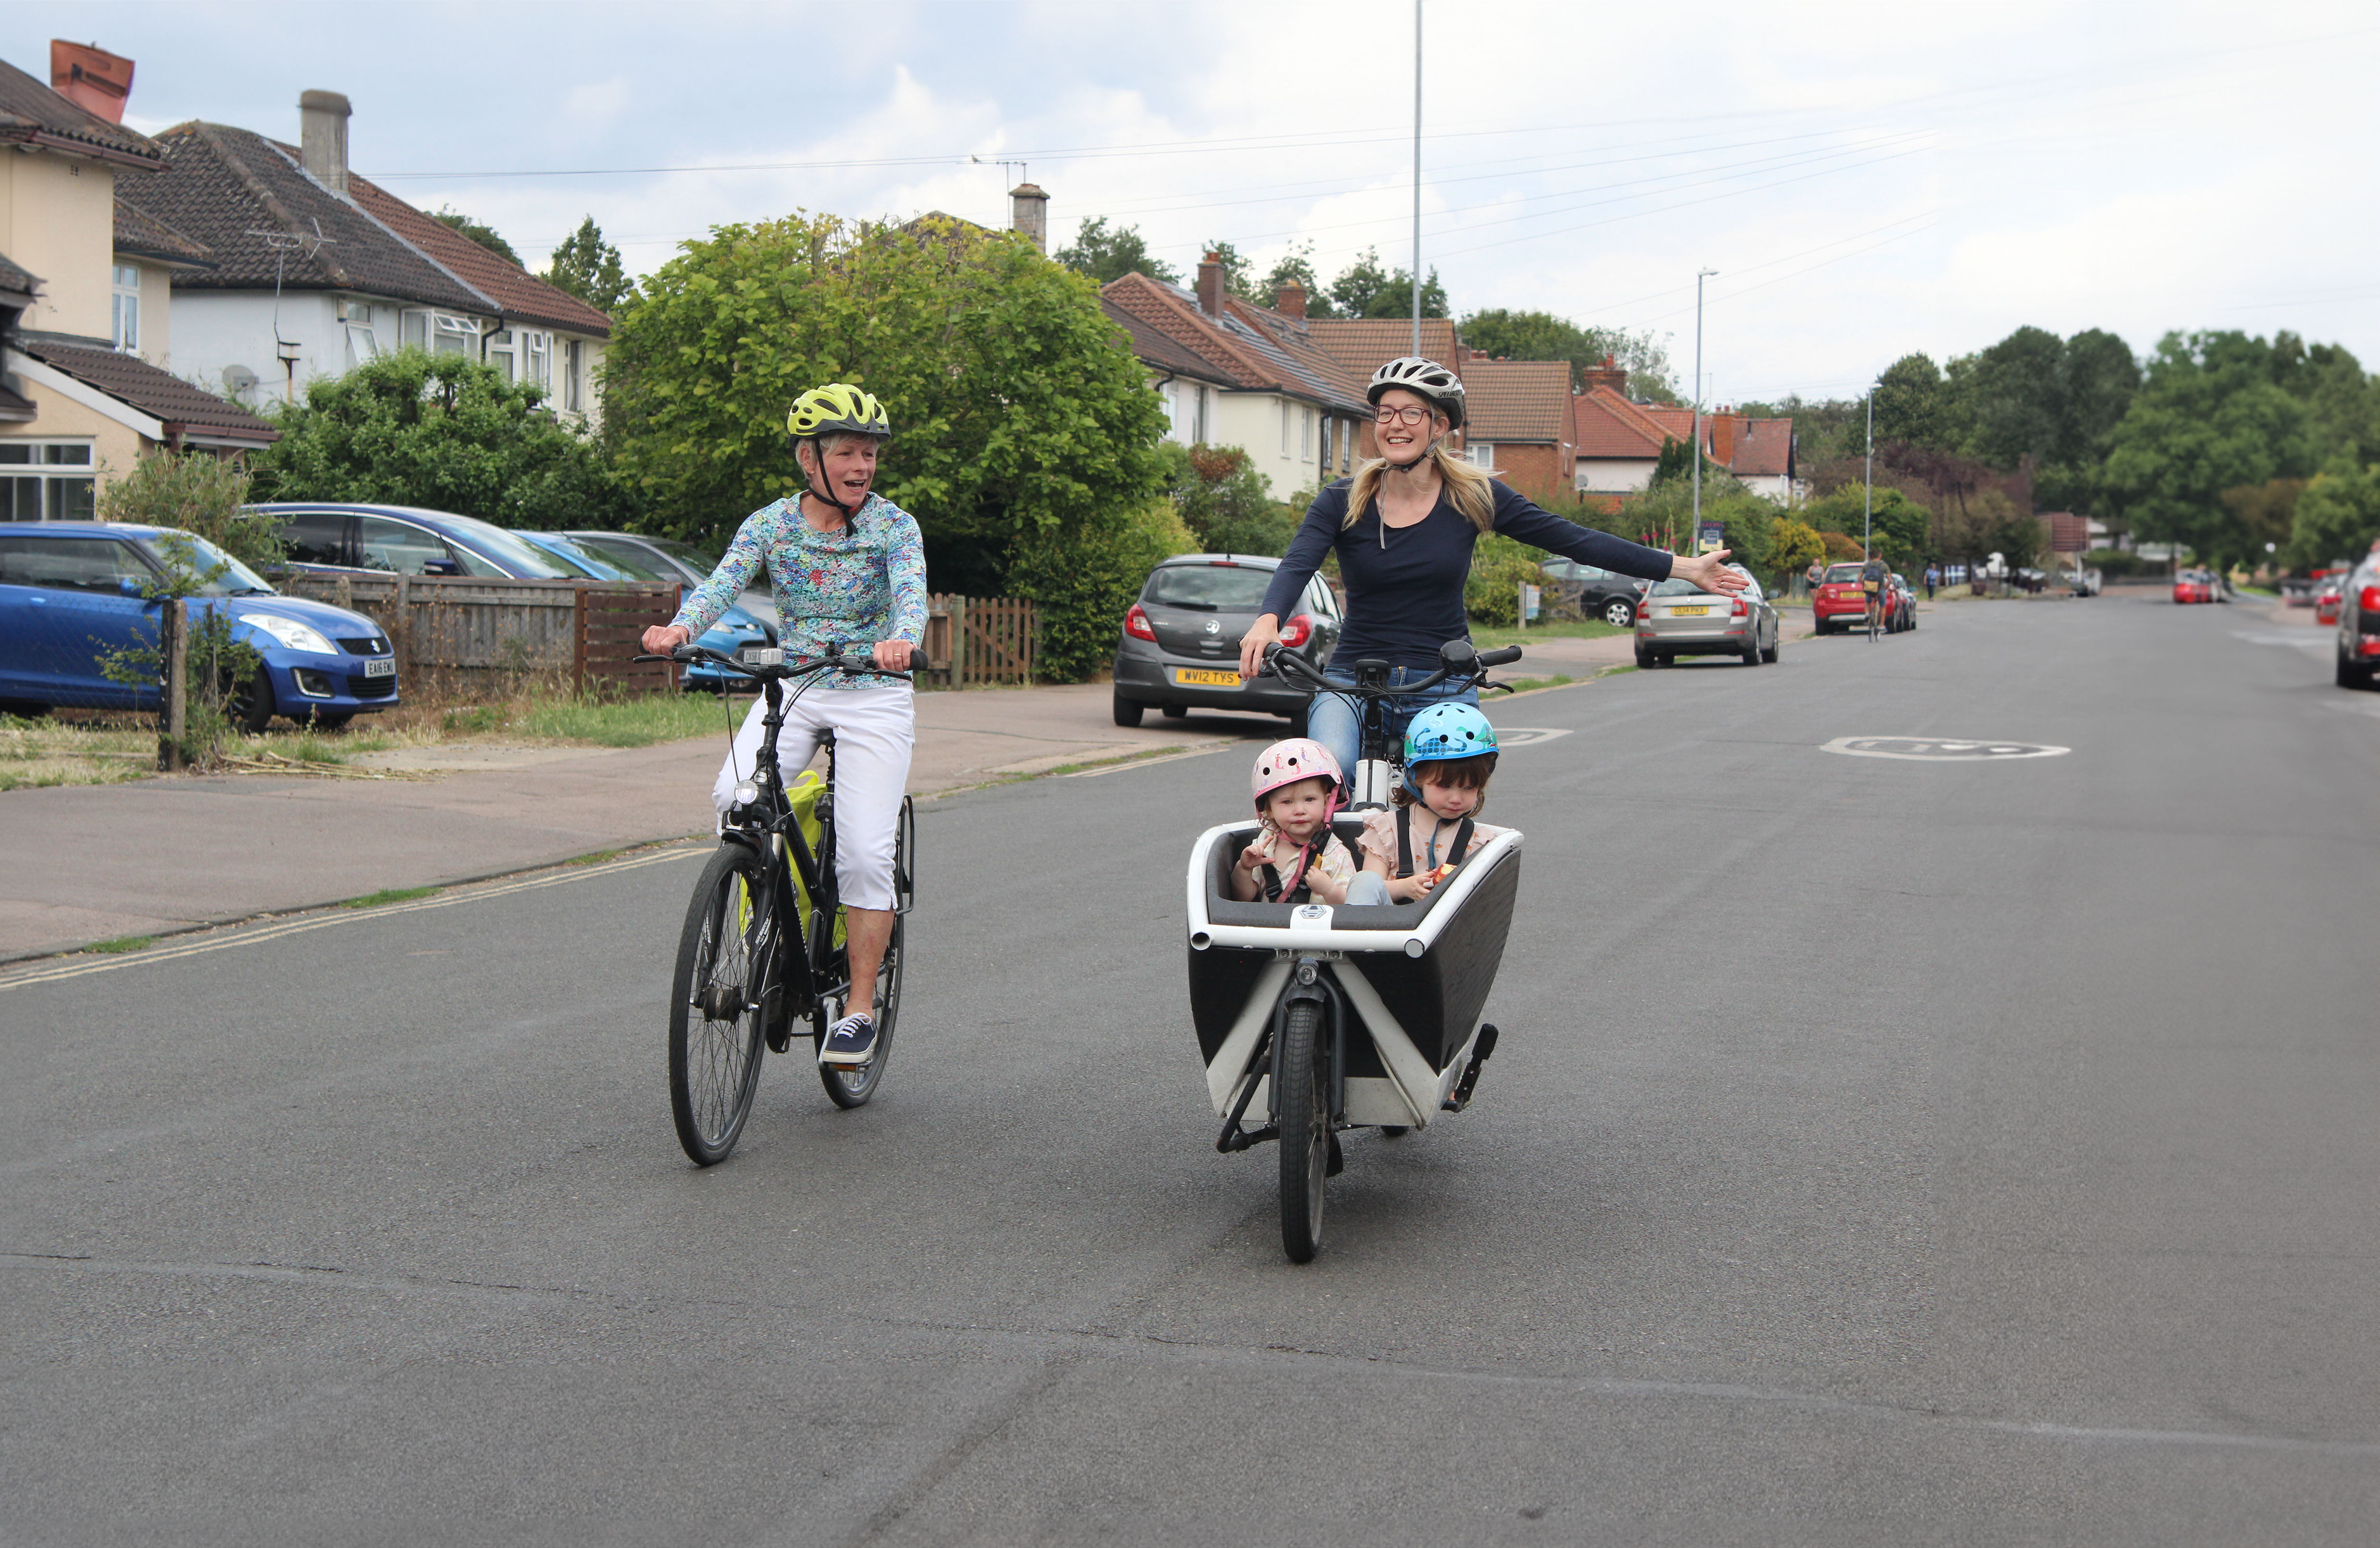 Two women are riding their cycles in primary position down a residential road. One is riding a bicycle, while the other is signalling to turn, and riding a cargo cycle, with two young children sitting in the front compartment. They are all wearing safety helmets and smiling.